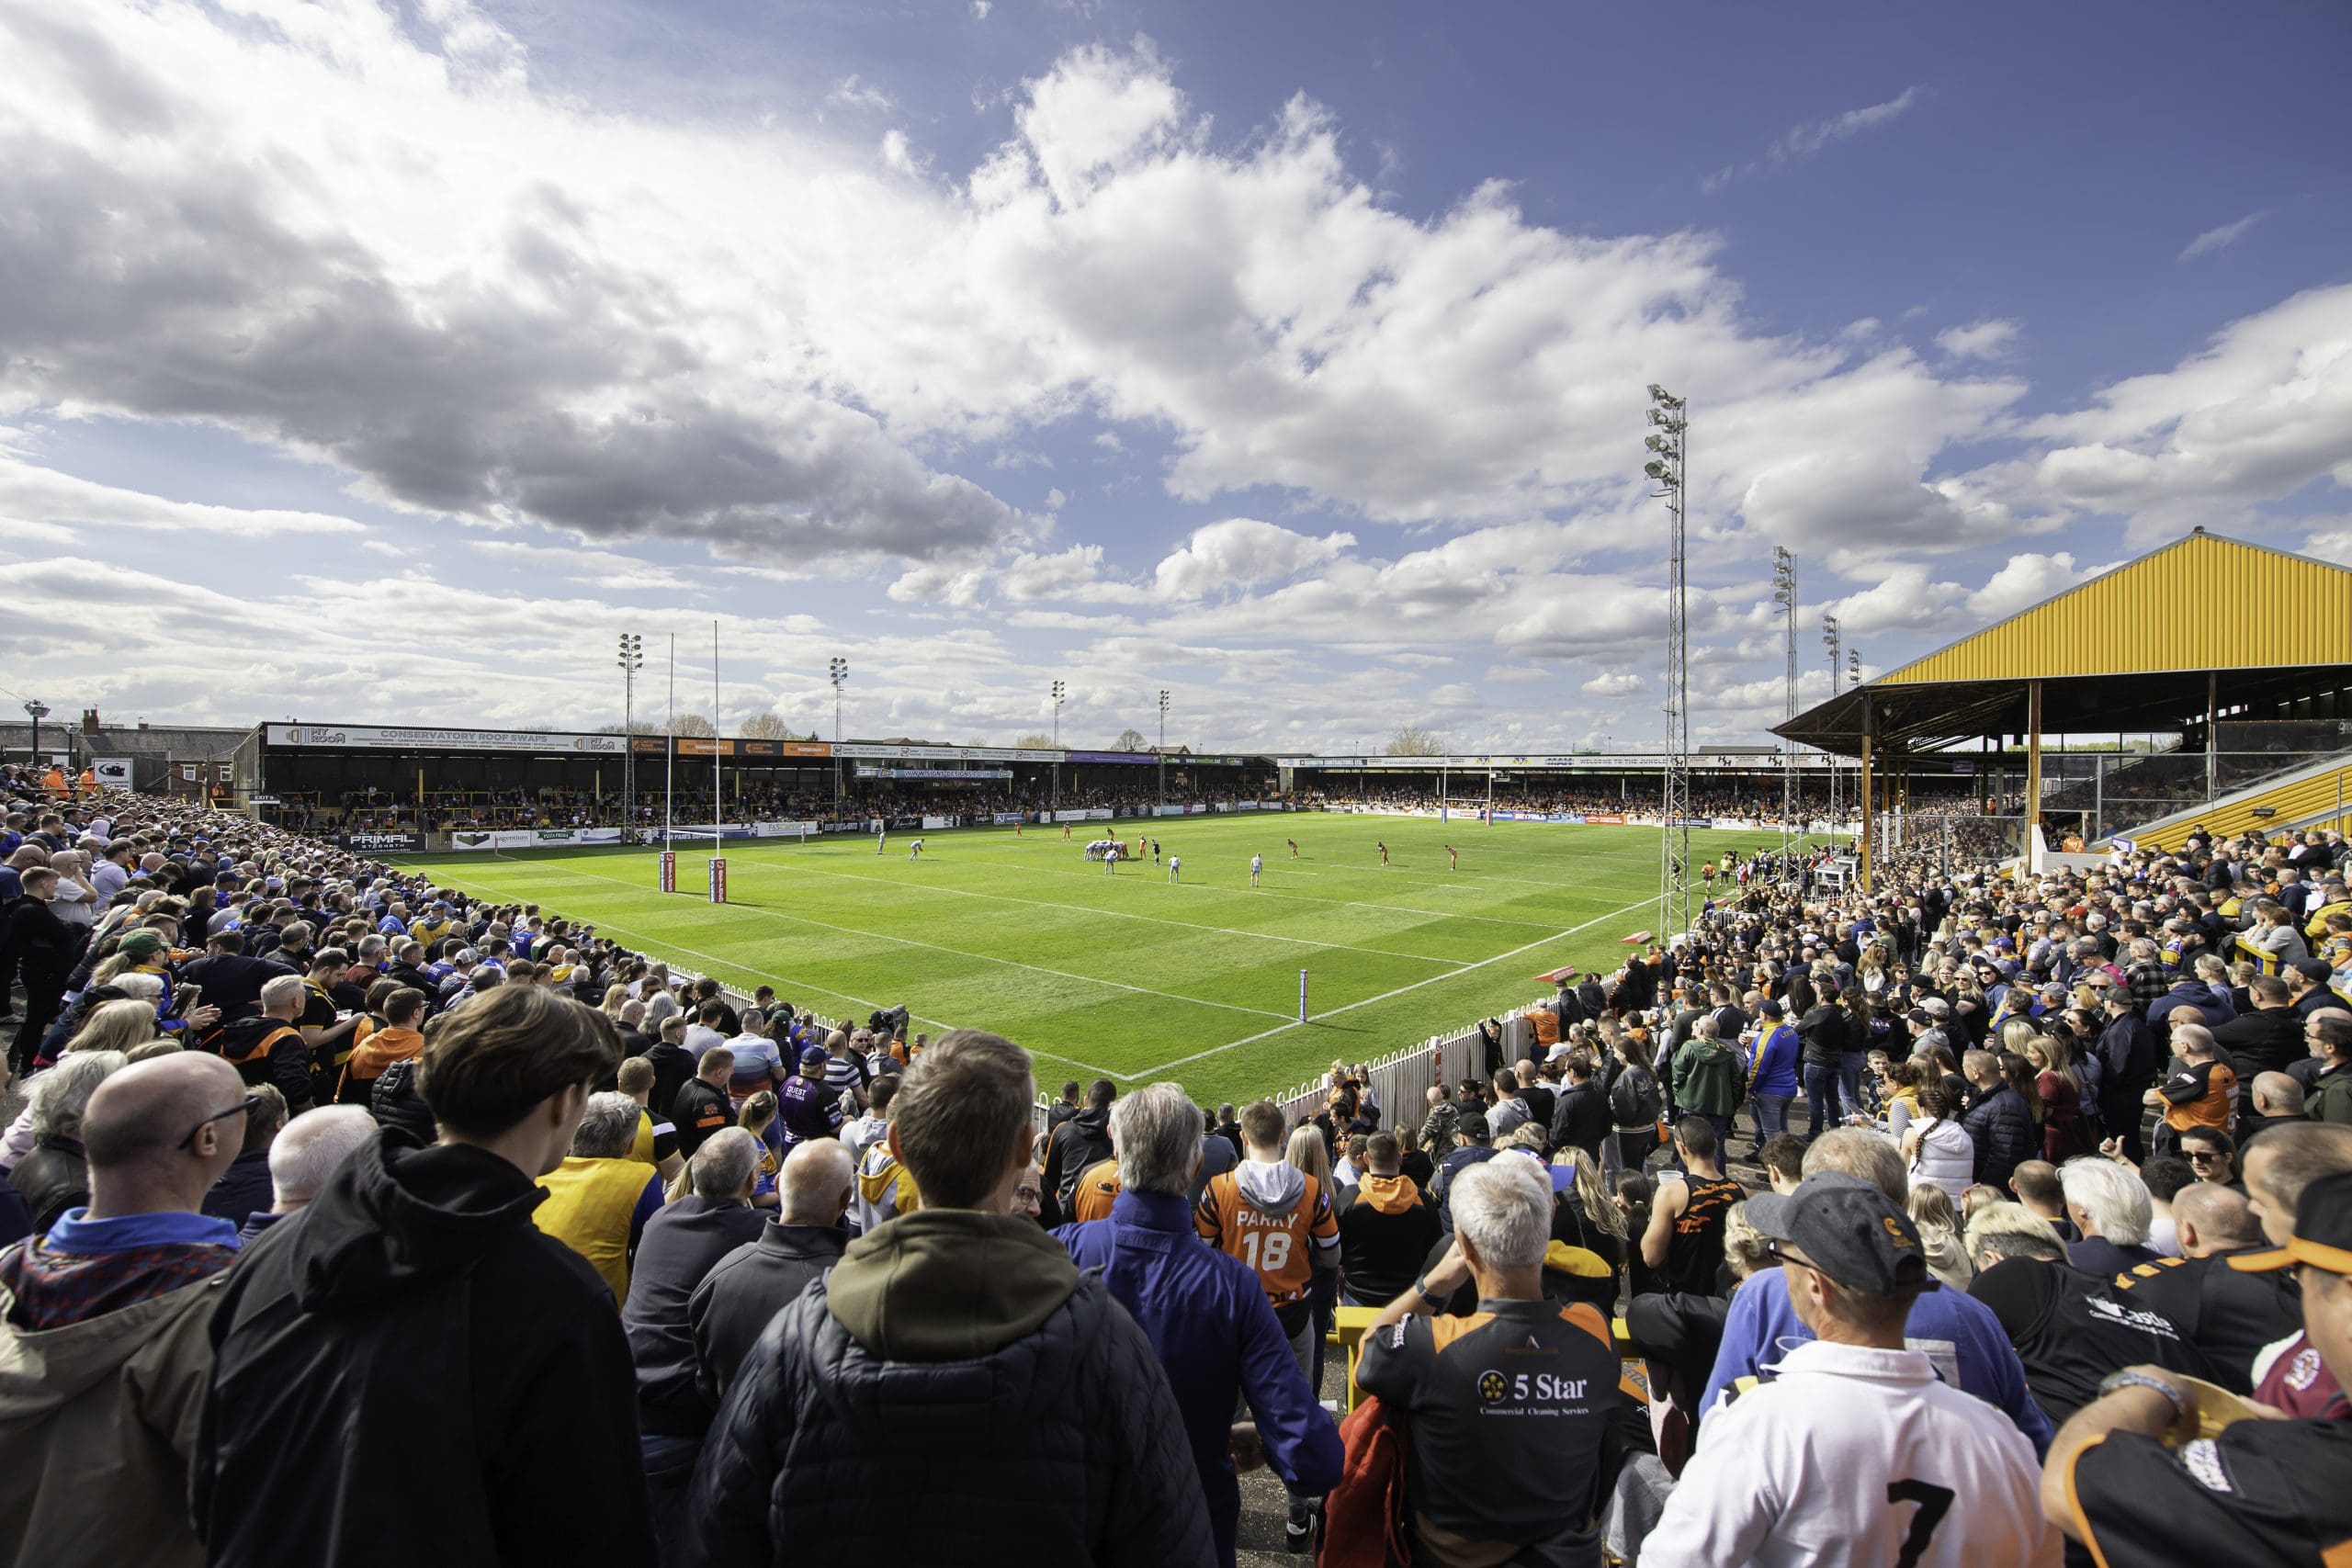 Match Preview Castleford Tigers (A) St.Helens R.F.C.